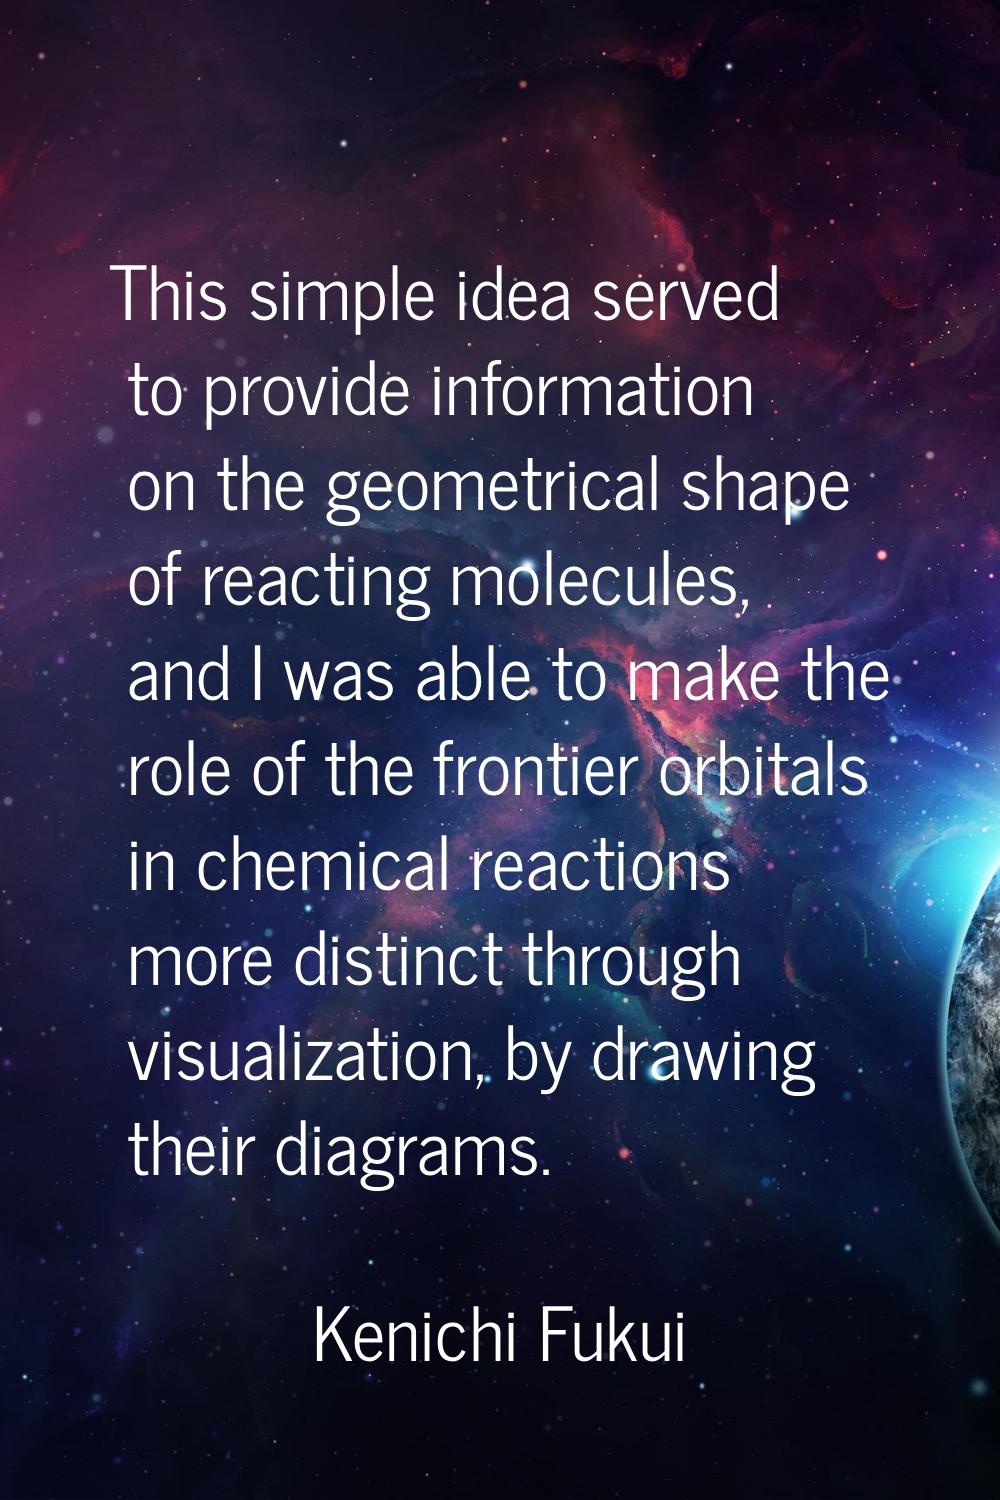 This simple idea served to provide information on the geometrical shape of reacting molecules, and 